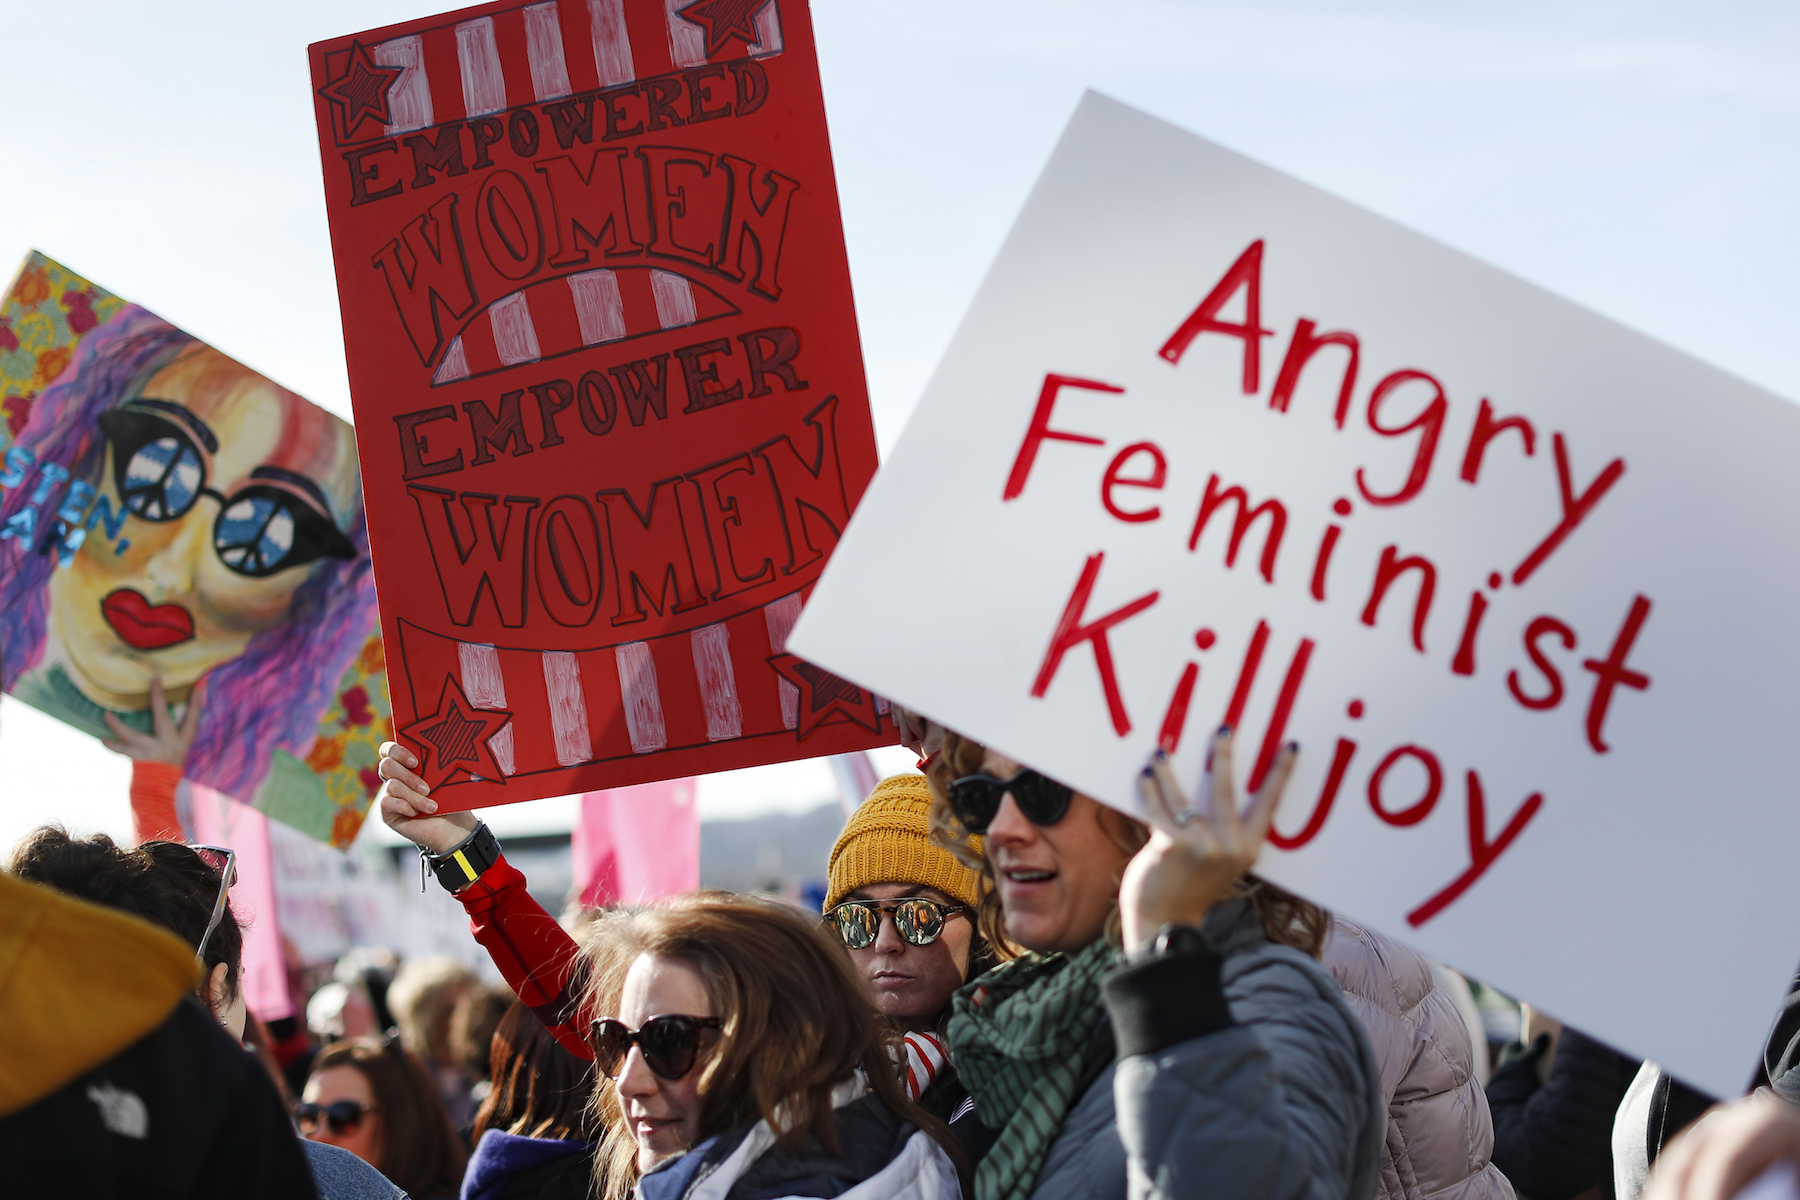 PHOTOS: Women's marches across the country | abc13.com